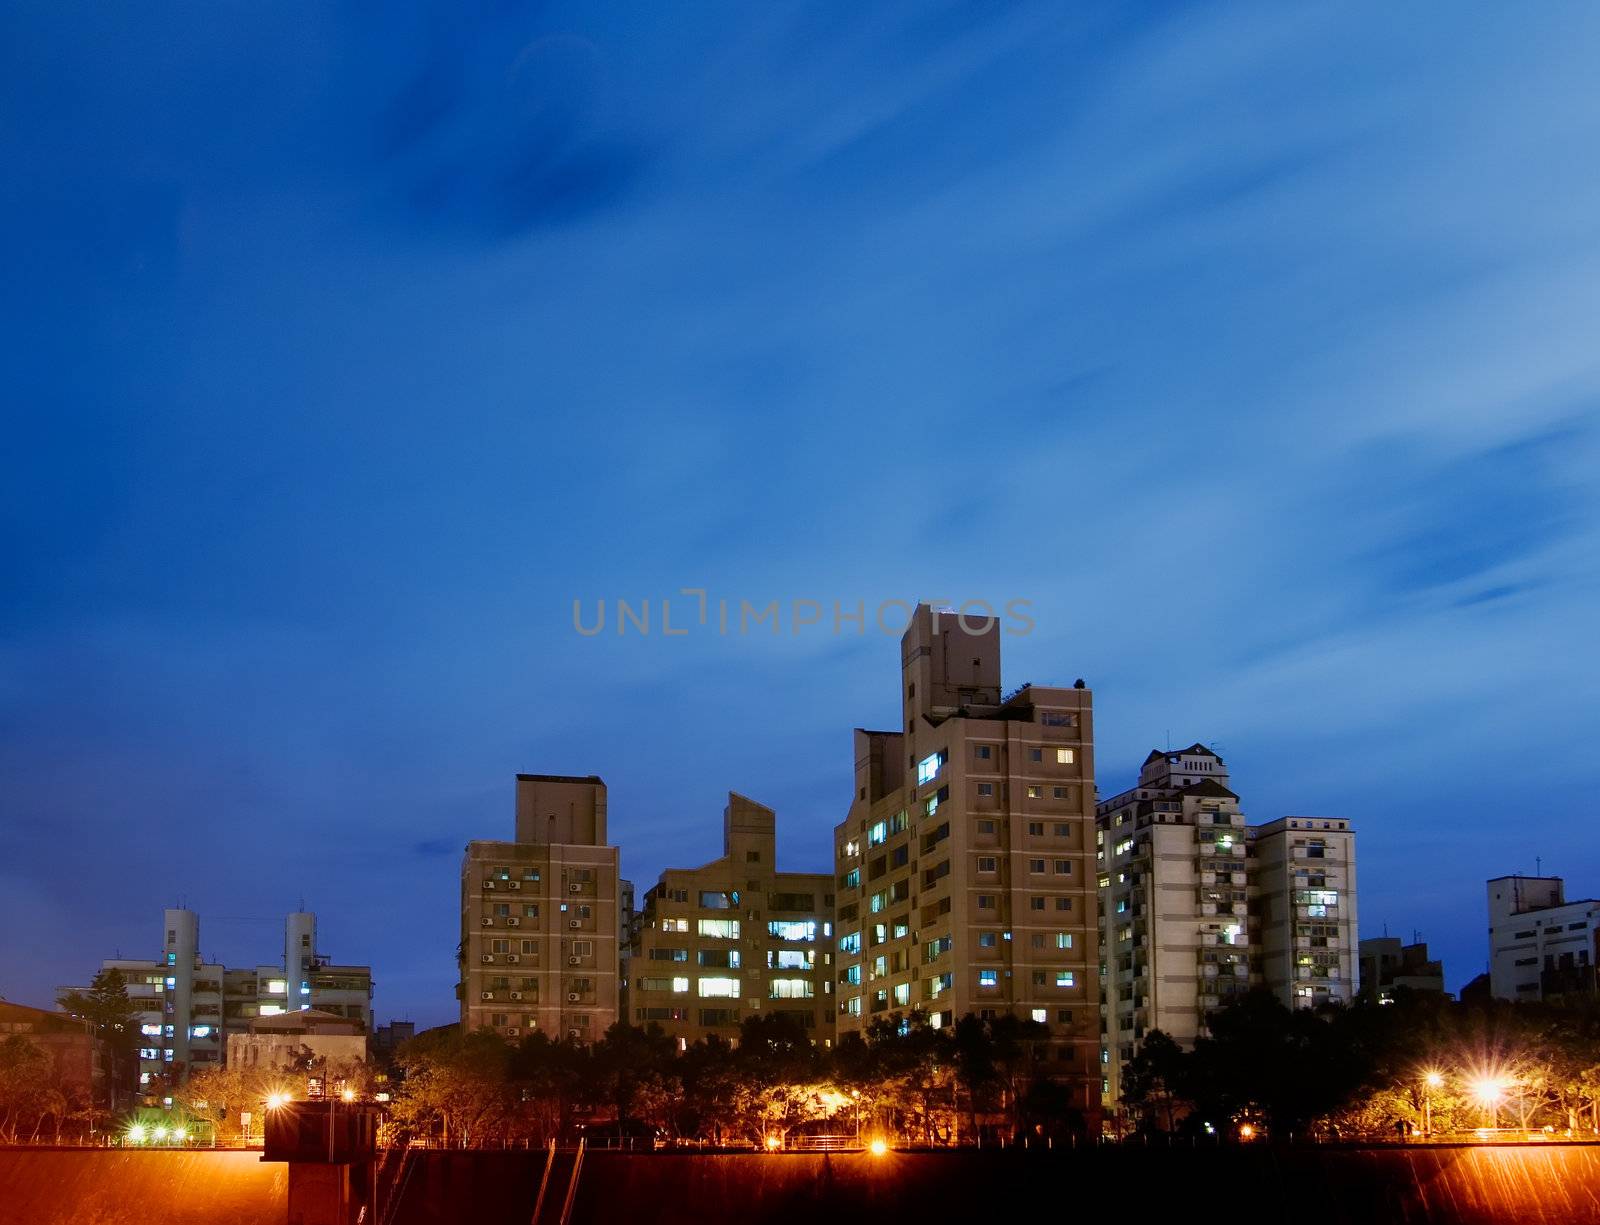 A Beautiful night scenes of building and apartment in Taiwan.